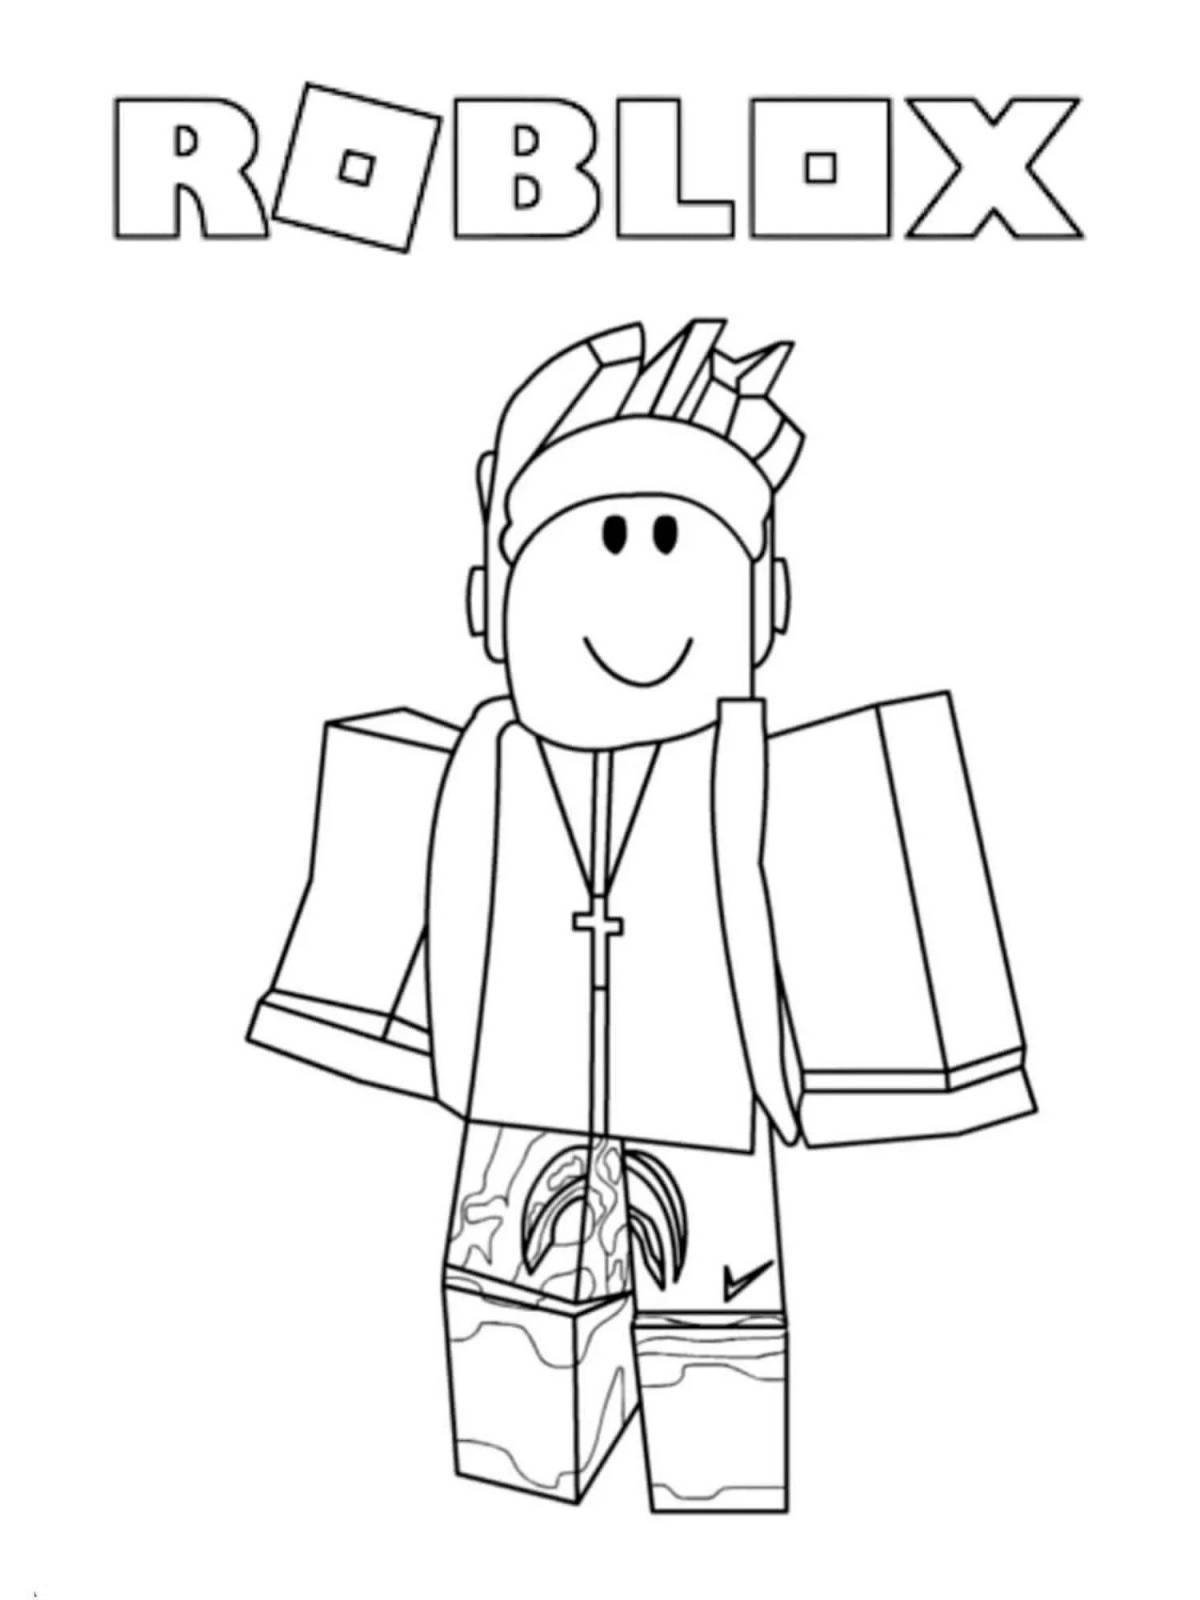 Rainbow friends roblox coloring book for boys